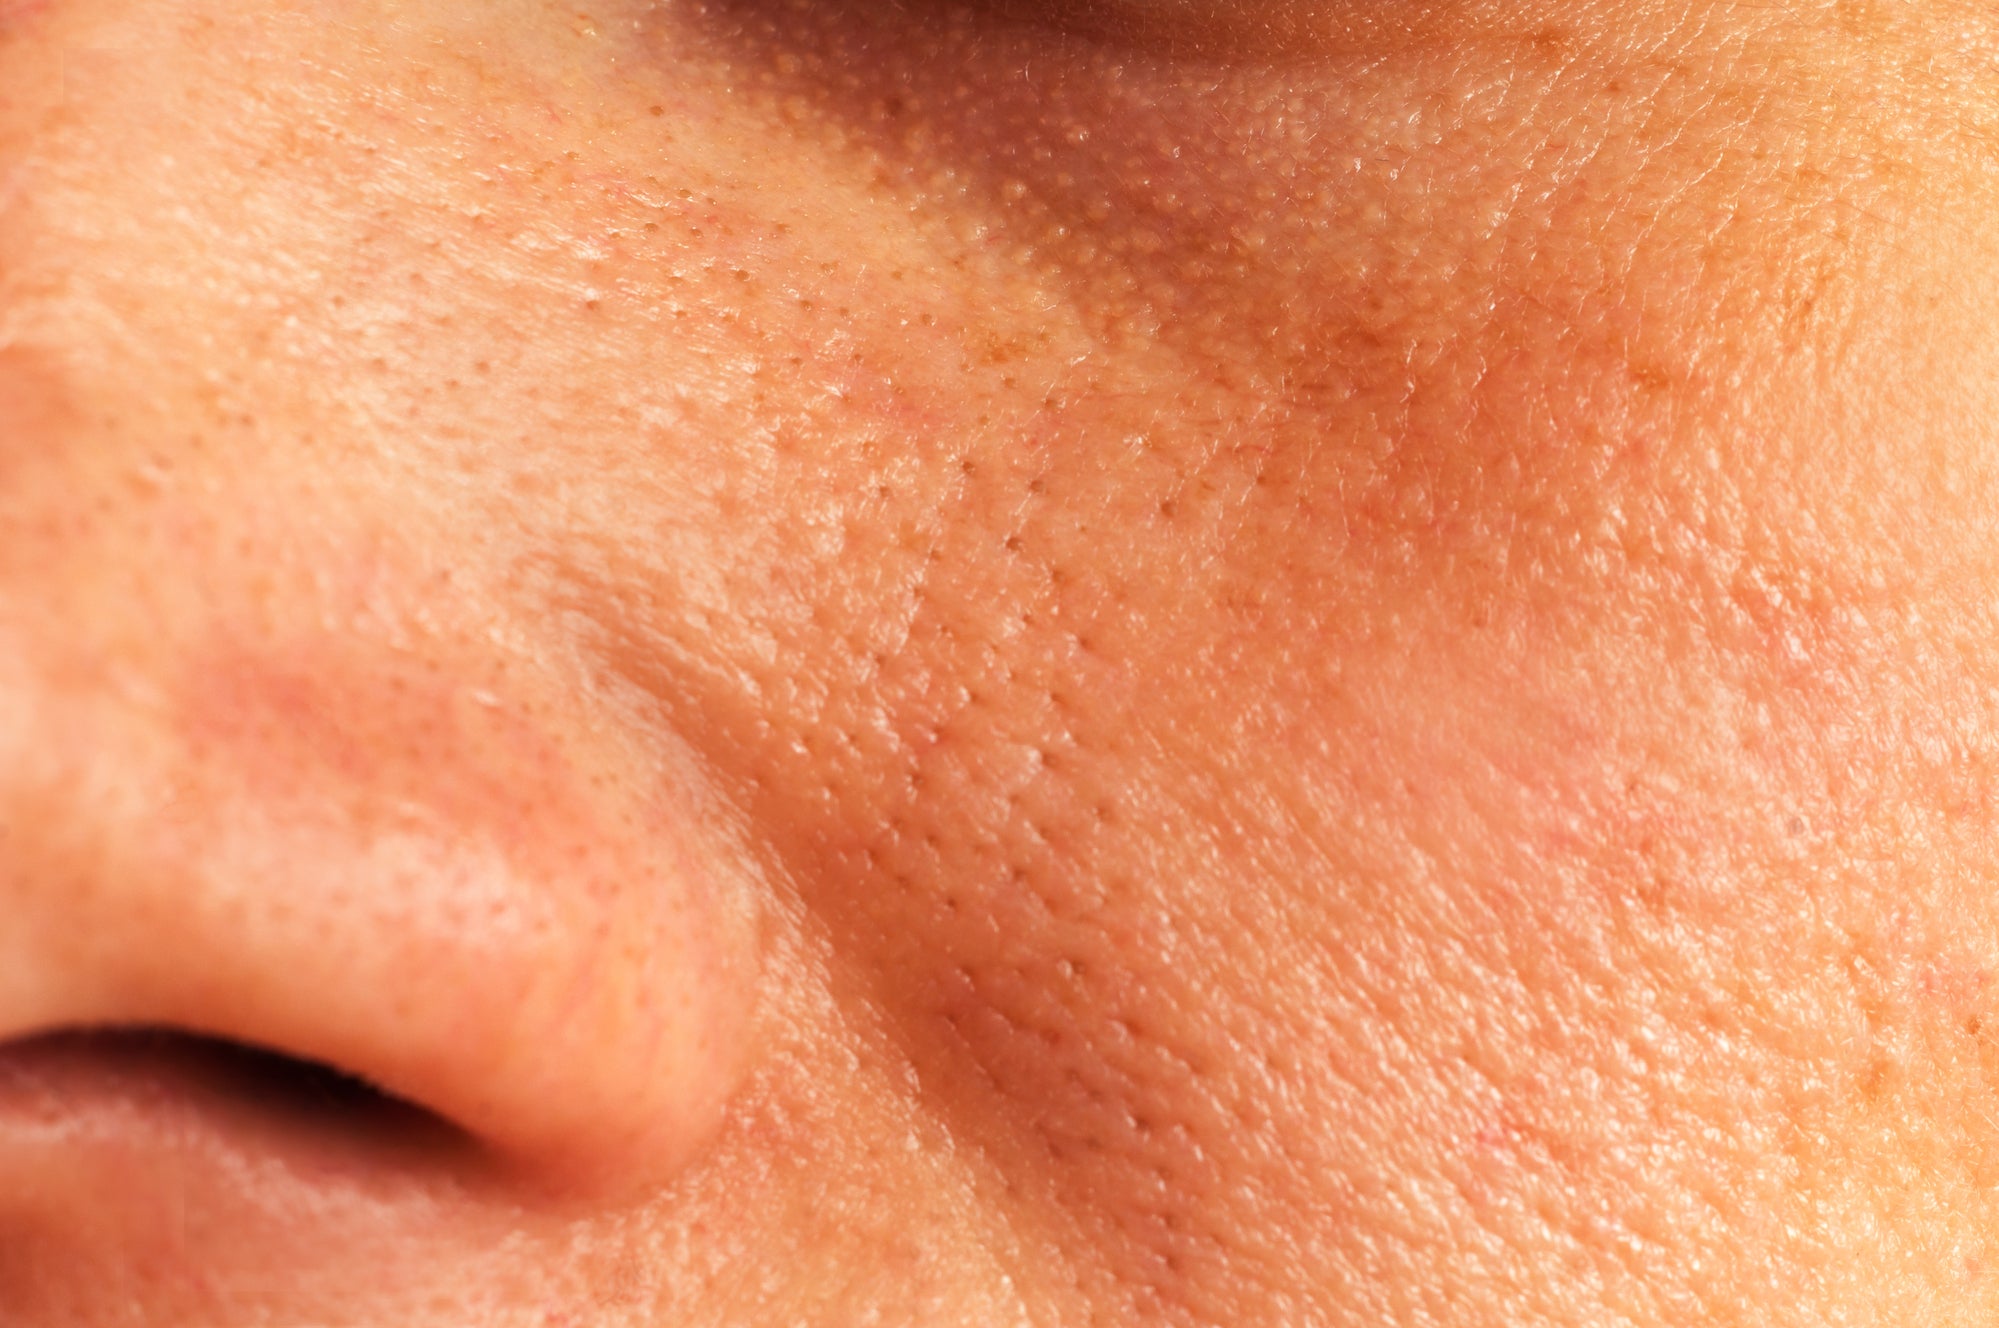 What can treat large facial pores?